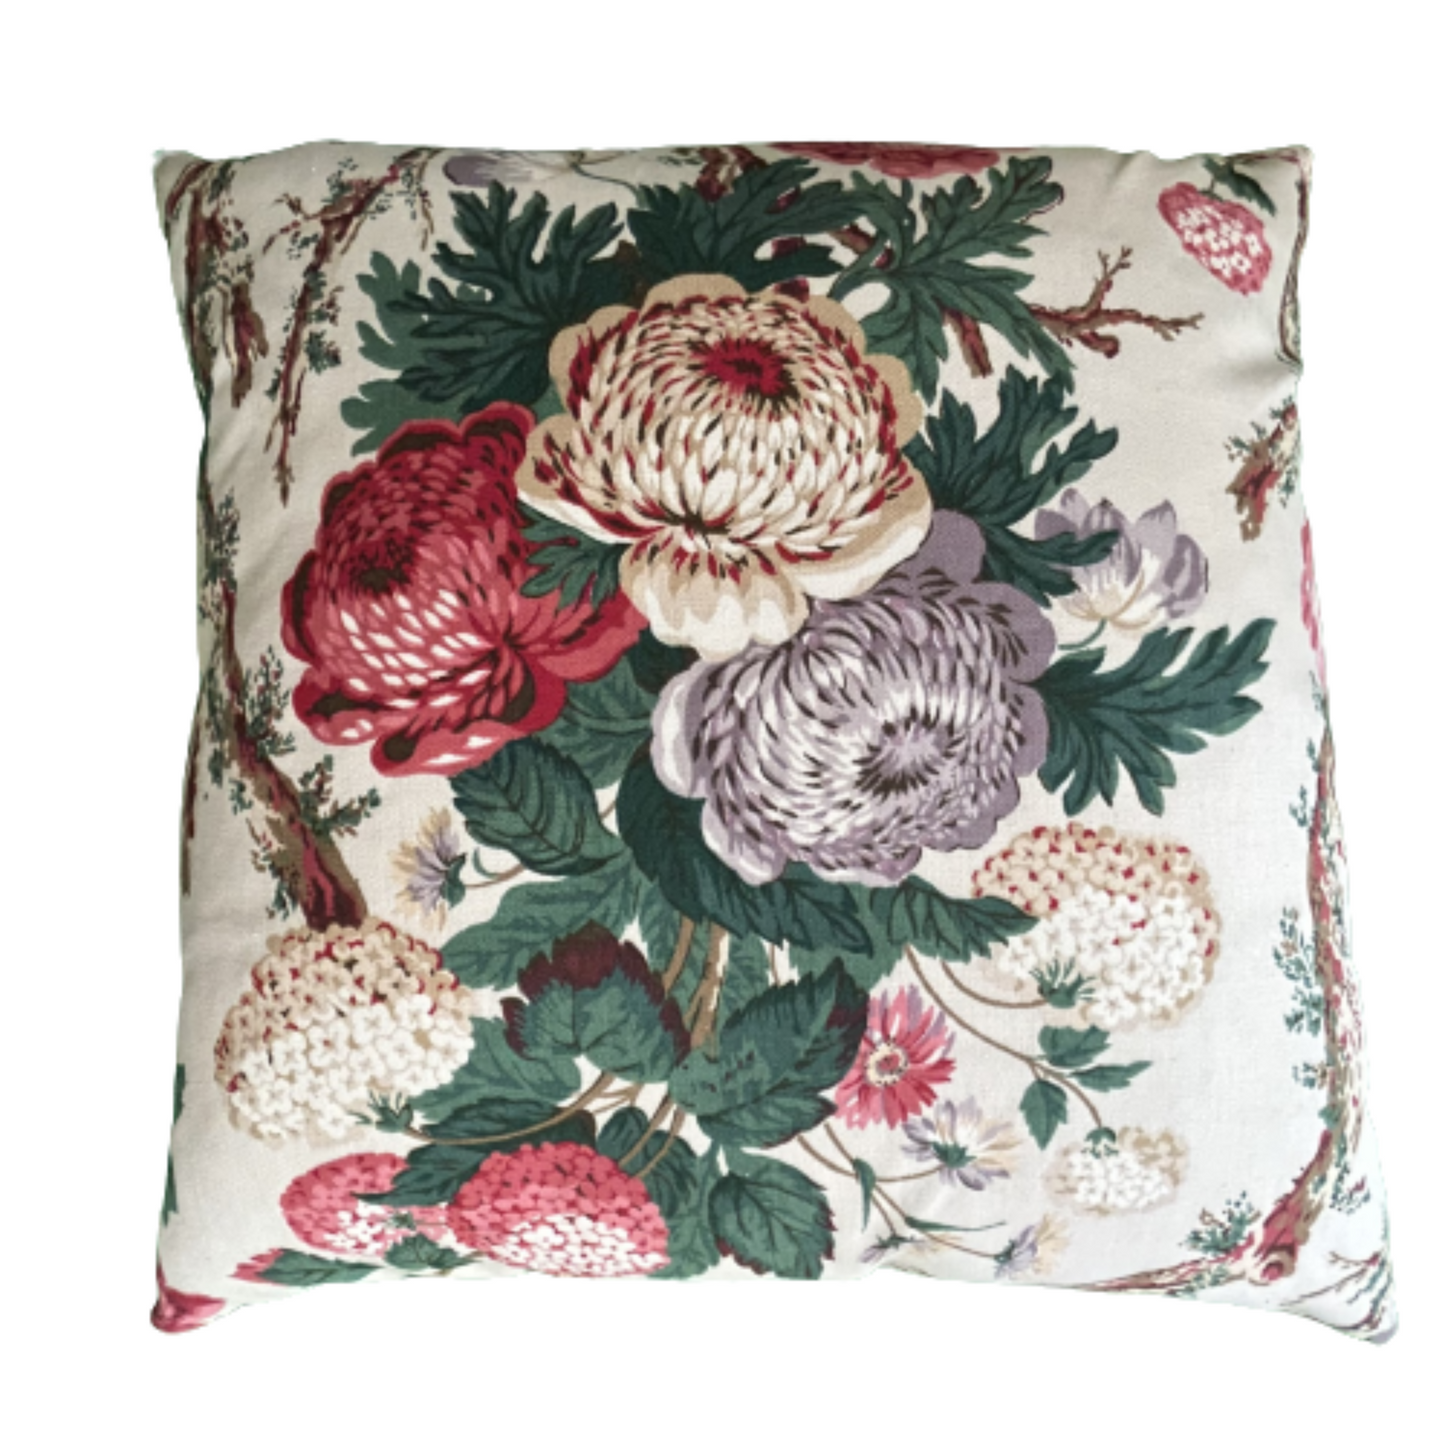 Aylsham British National Trust Classic Country House Floral 20 x 20 Decorative Pillow with Down Feather Insert